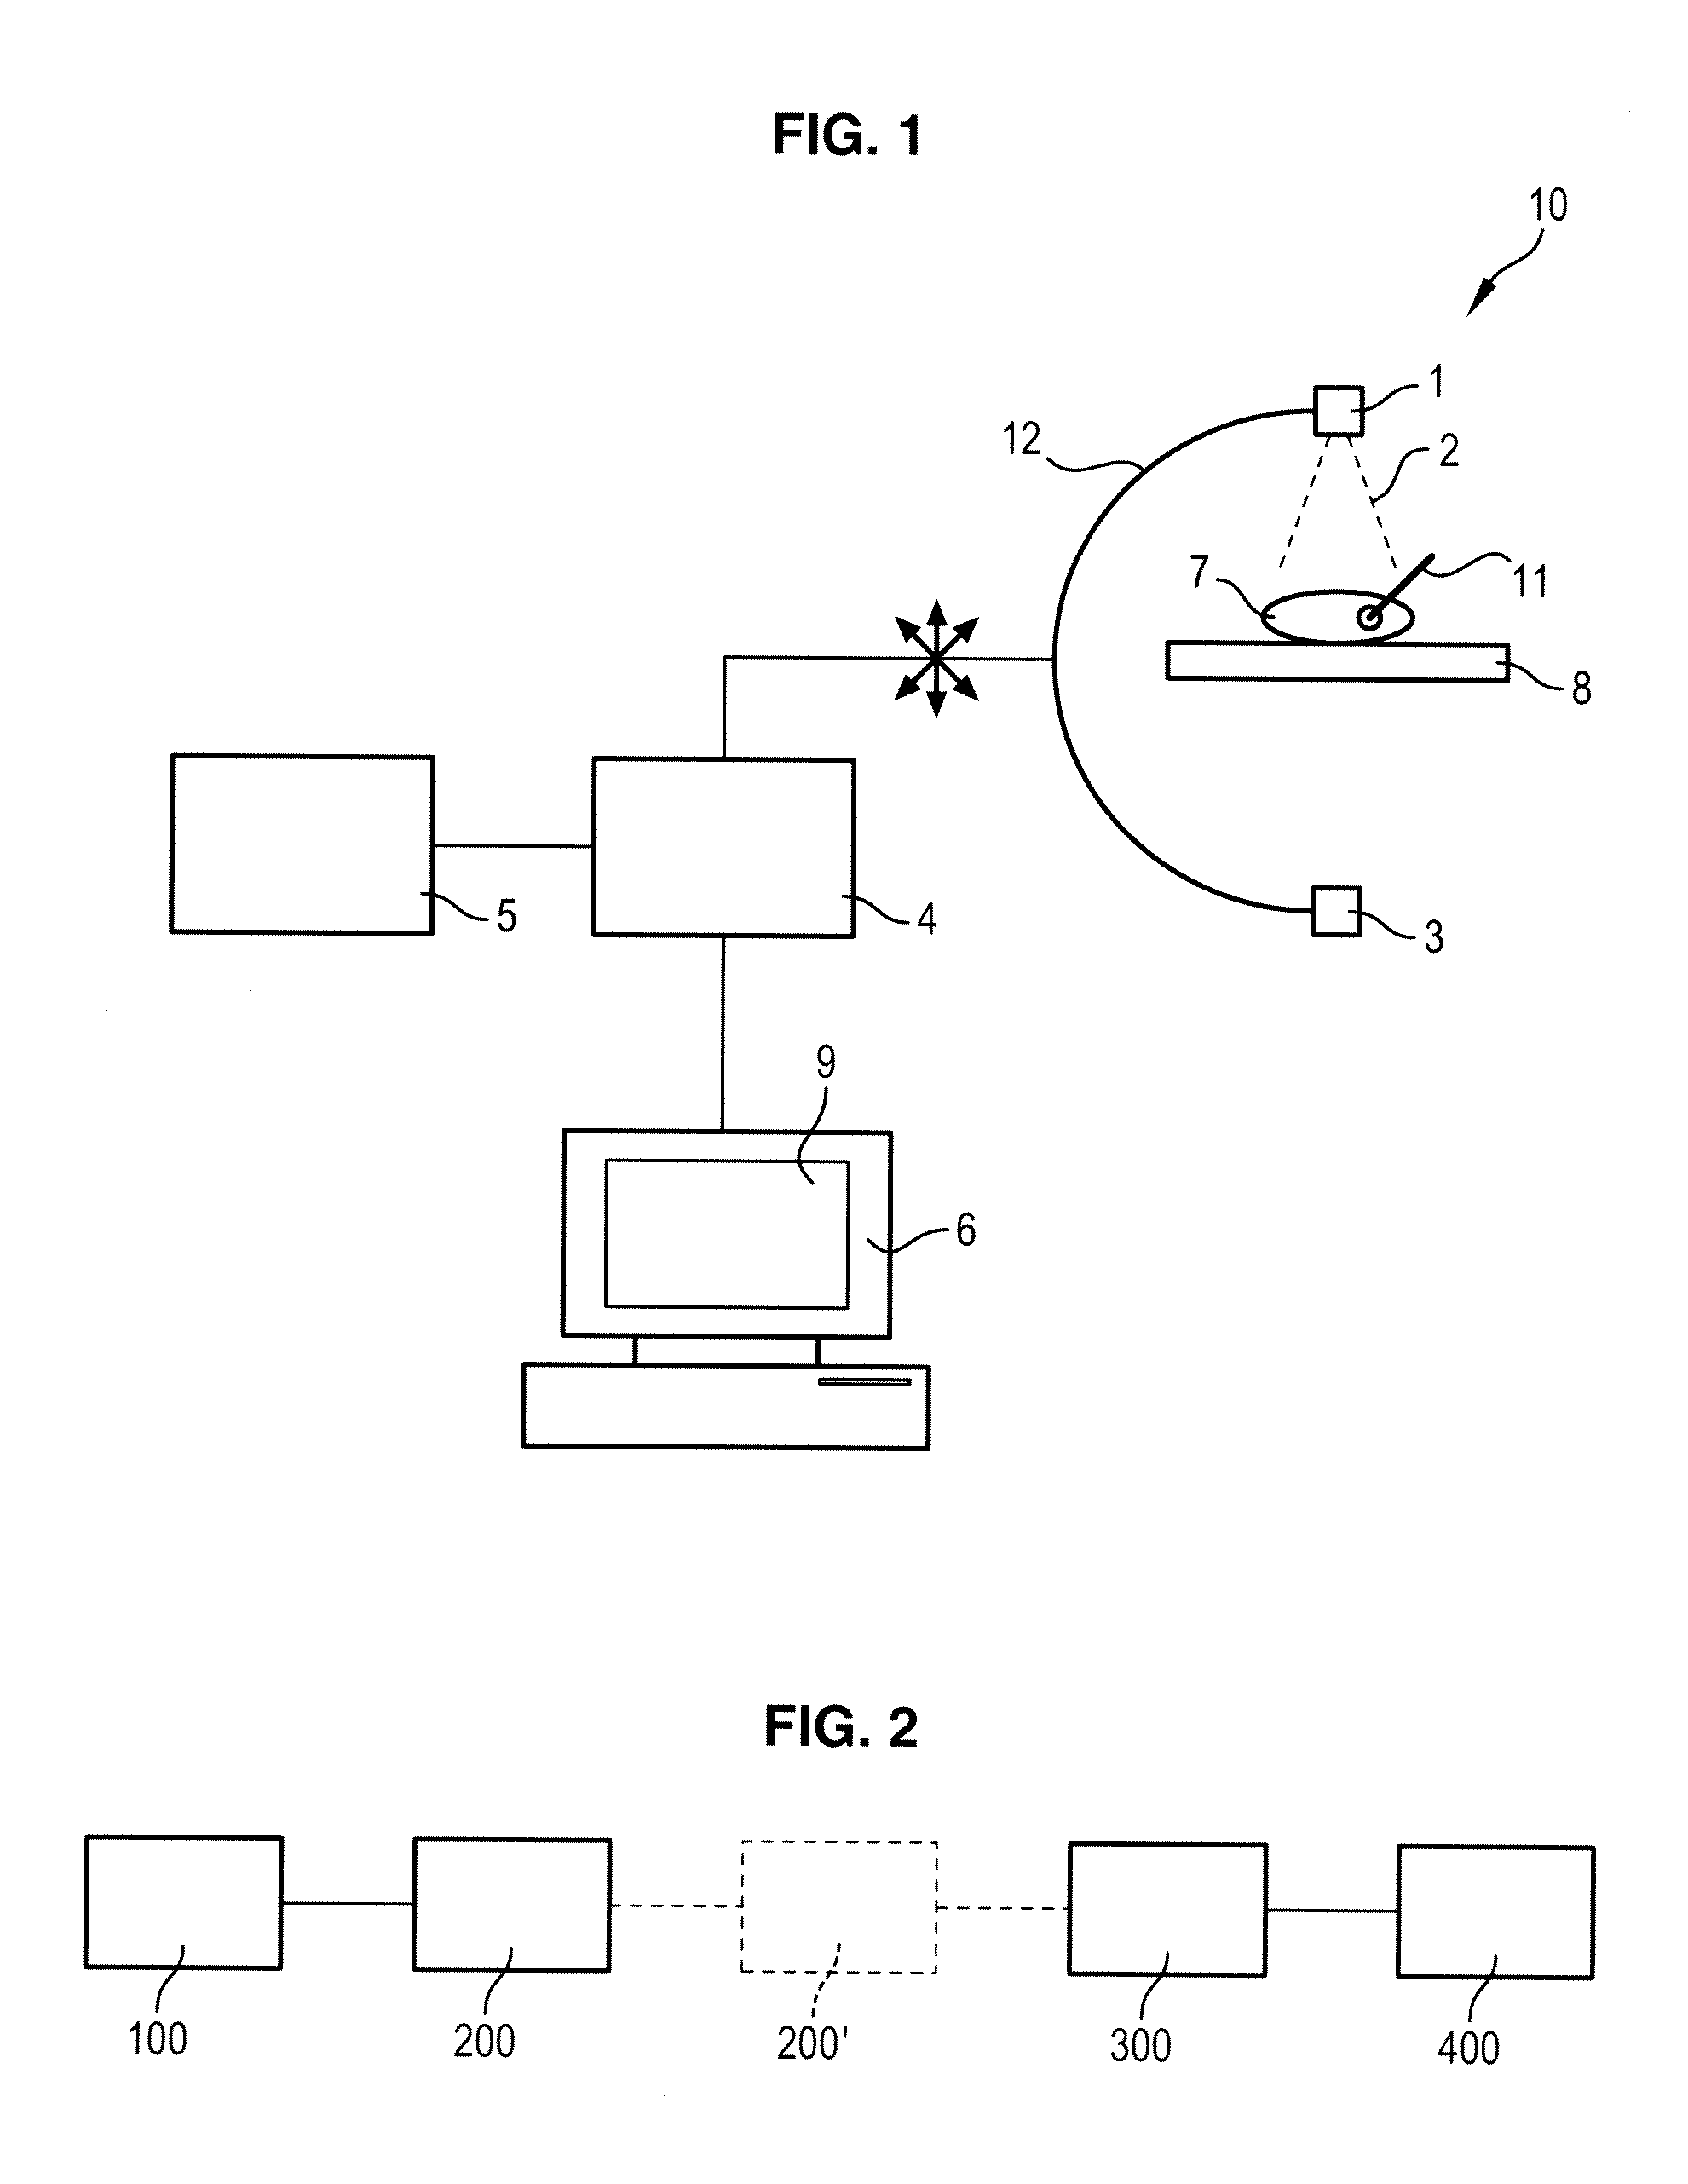 Method for processing radiological images to determine a 3D position of a needle